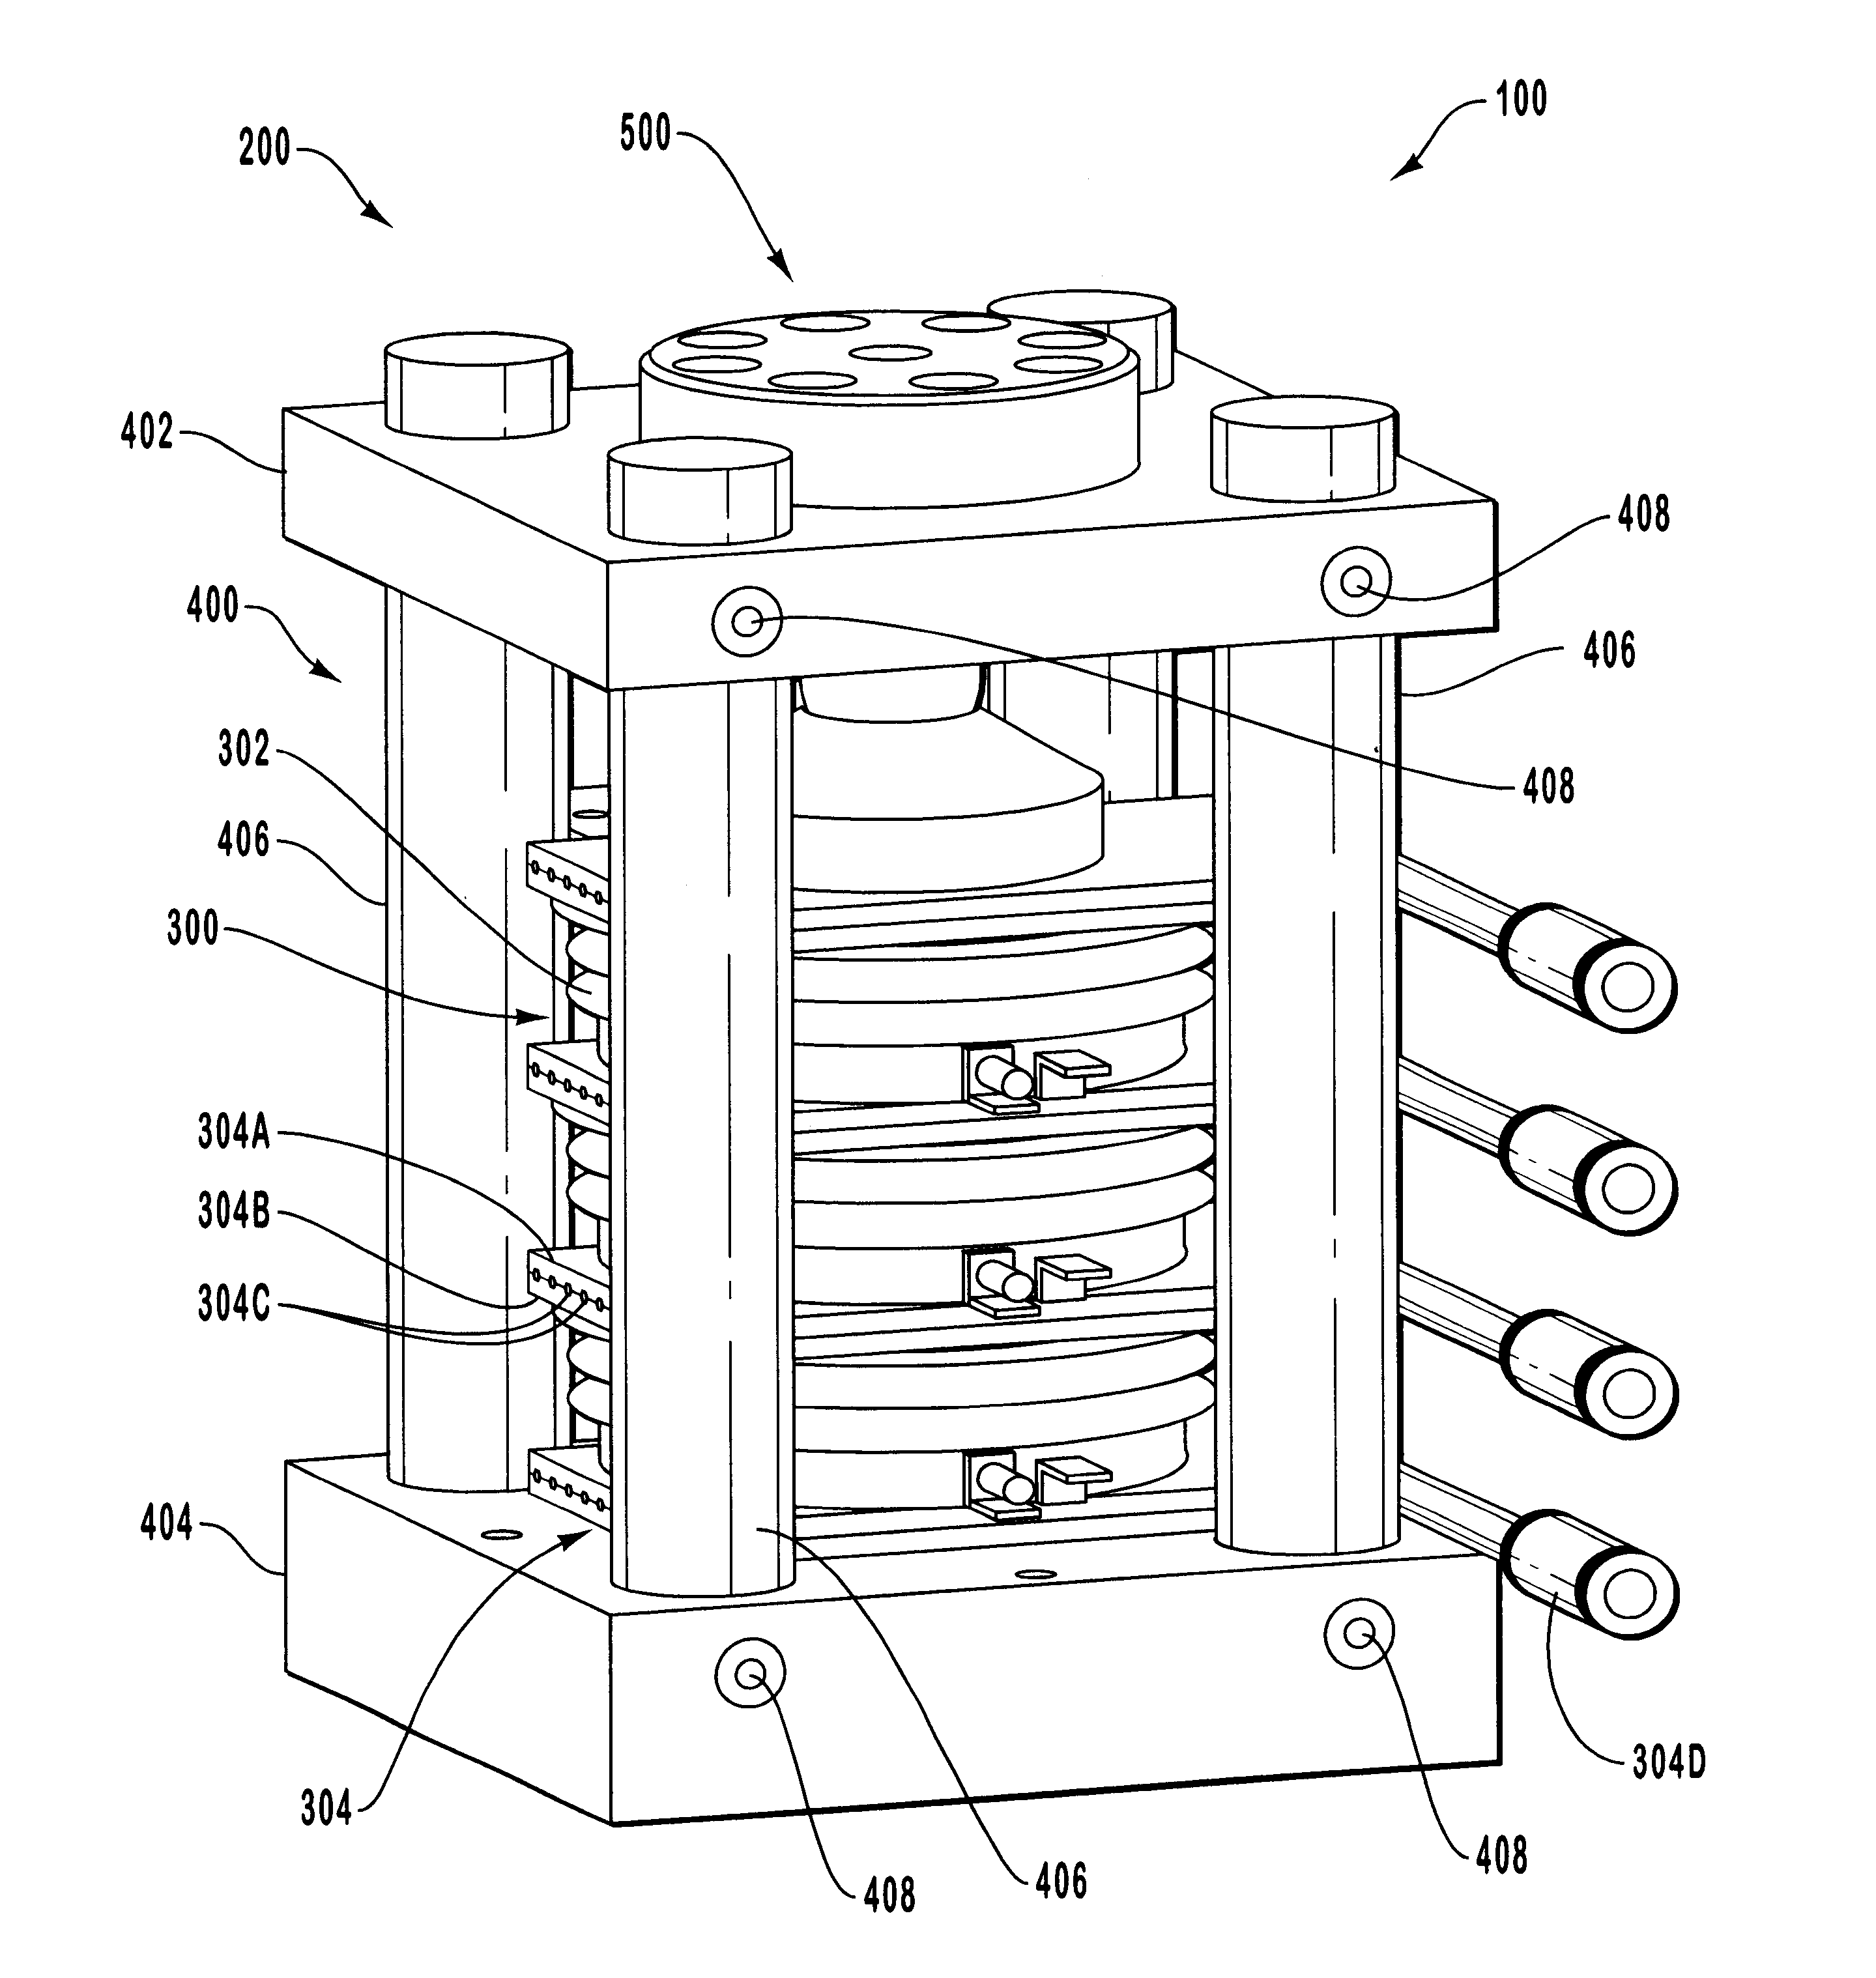 Clamping assembly for high-voltage solid state devices